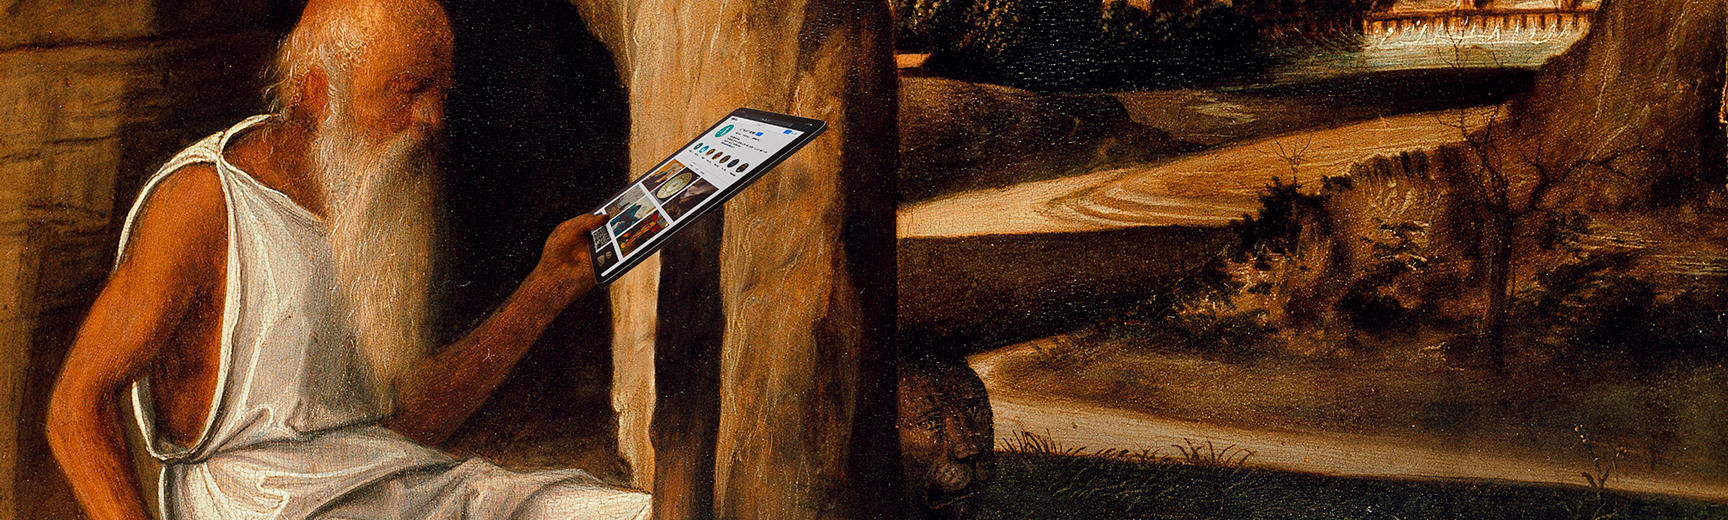 A painting of St Jerome Reading in a Landscape, by Giovanni Bellini, with St Jerome holding an iPad